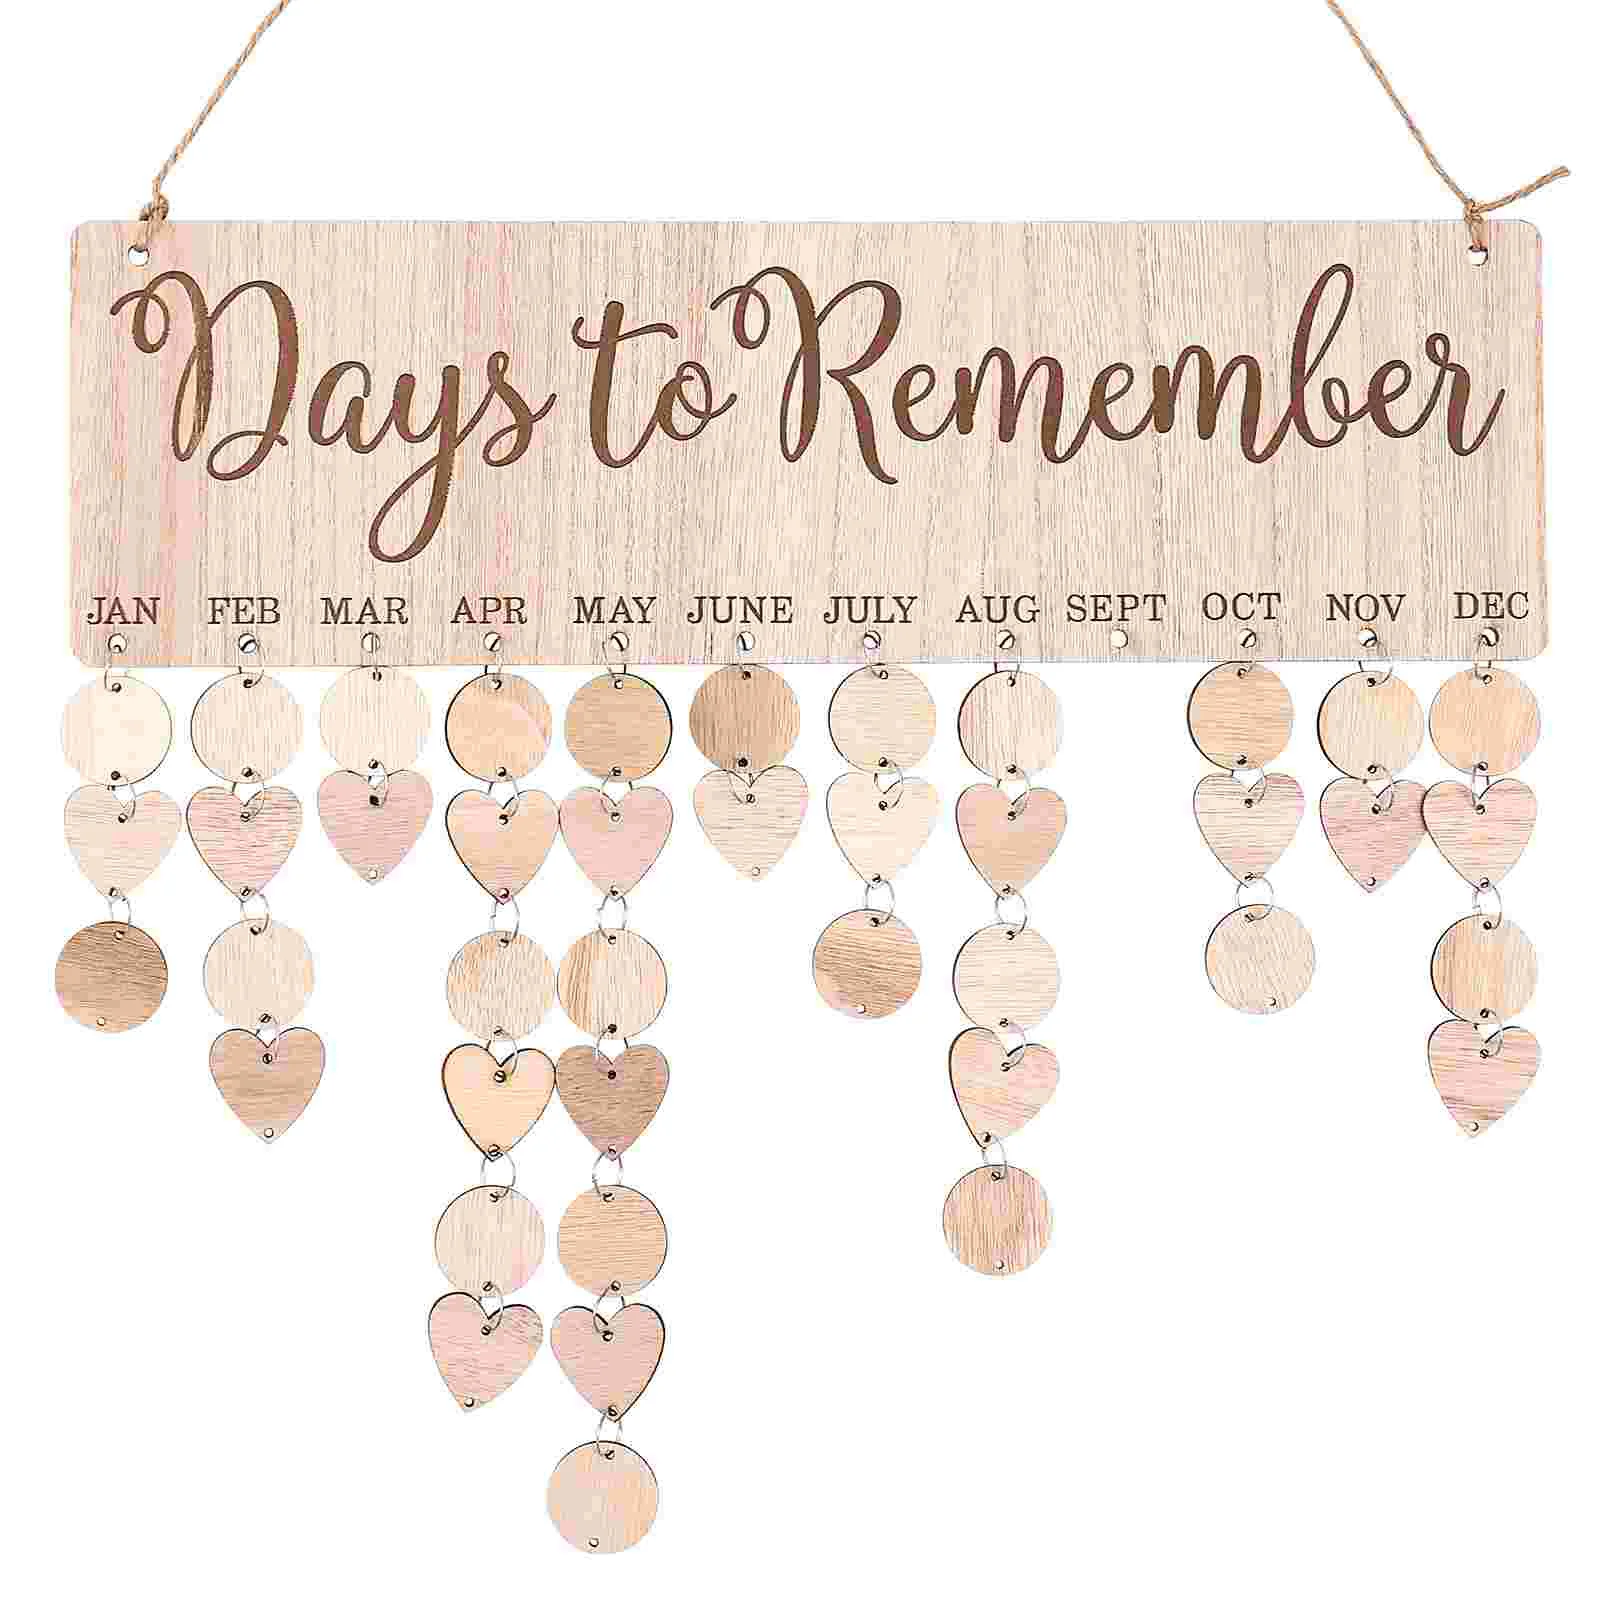 

Wooden Calendar Hanging Tag Birthday Plaque Reminder Family Board Home Accents Decor